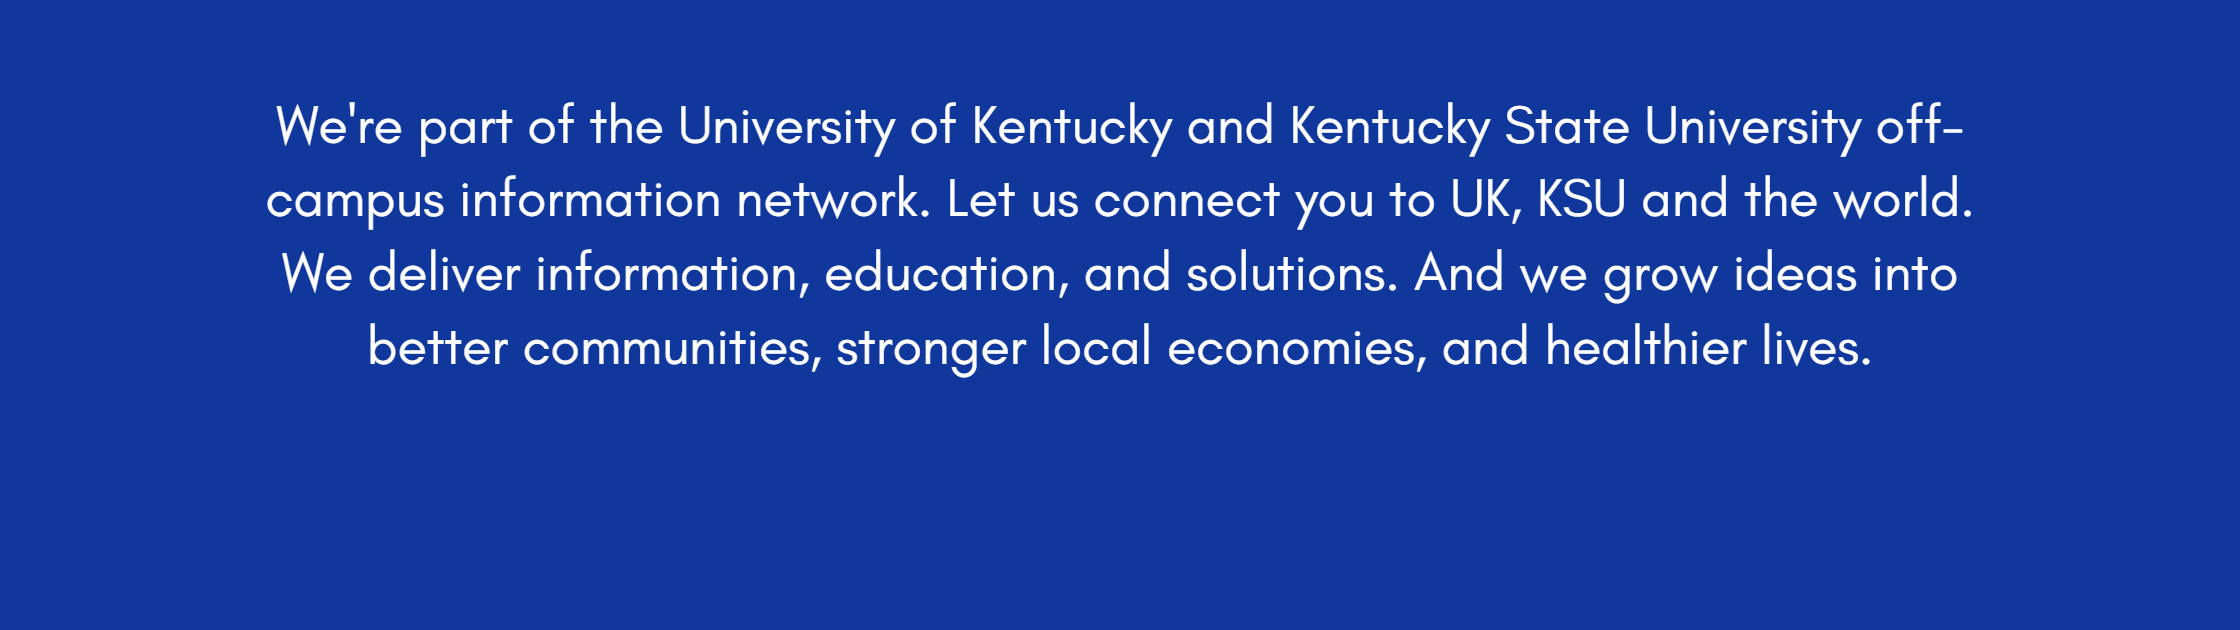 We're part of the University of Kentucky and Kentucky State University off-campus information network. Let us connect you to UK, KSU and the world. We deliver information, education, and solutions. And we grow ideas into better communities, stronger local economies, and healthier lives.